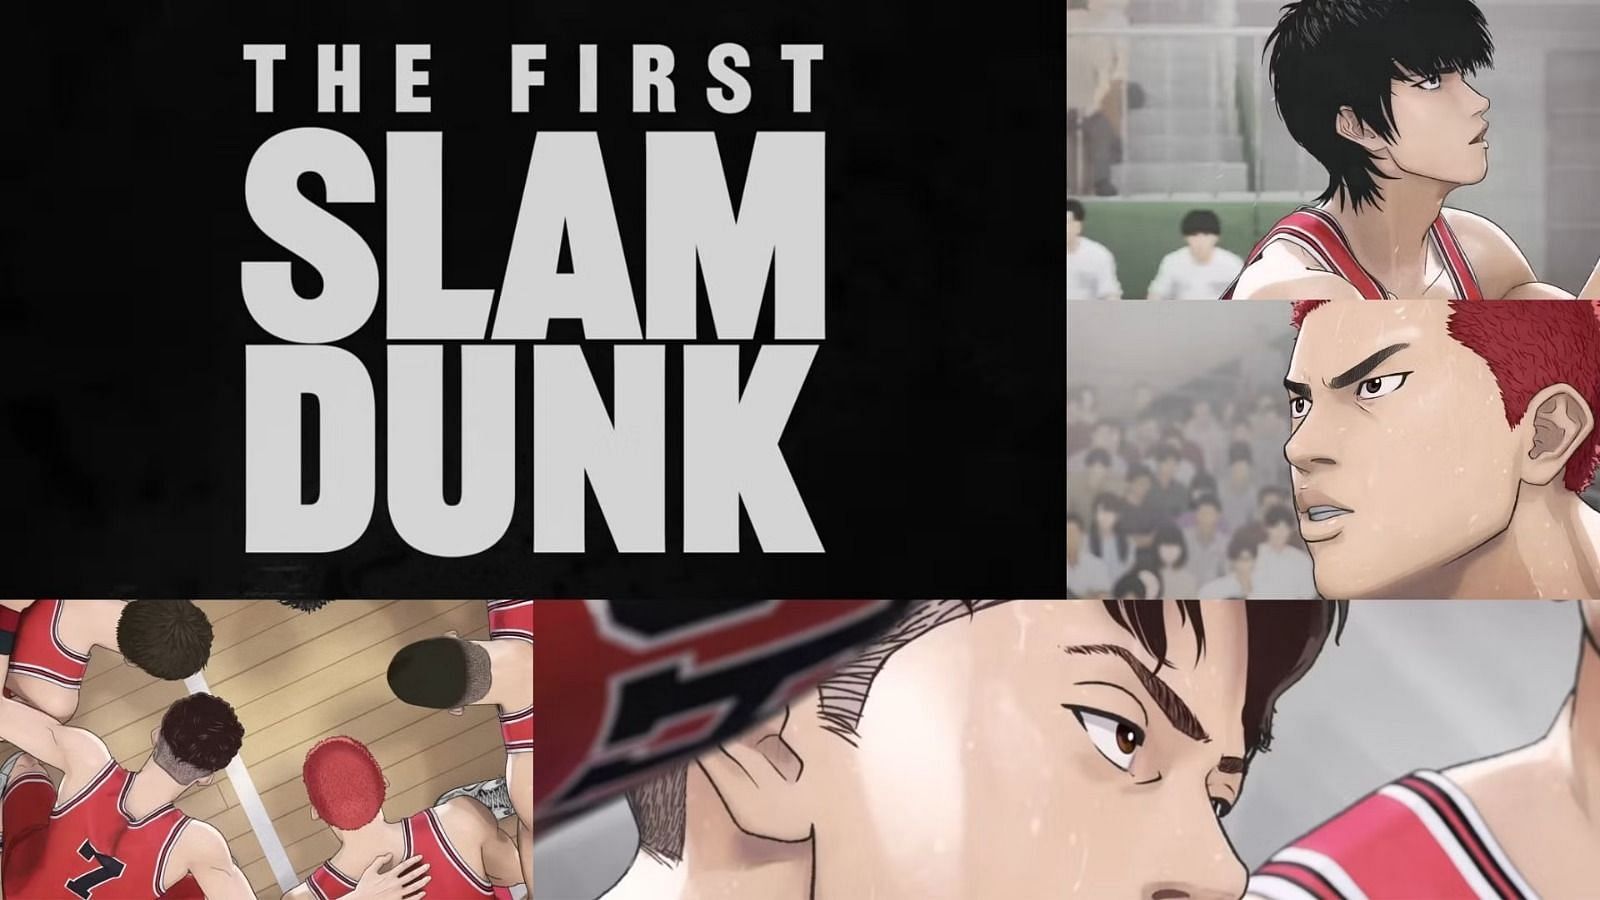 The First Slam Dunk took the world by storm by suppressing Demon Slayer. (Image via Toei Animation)